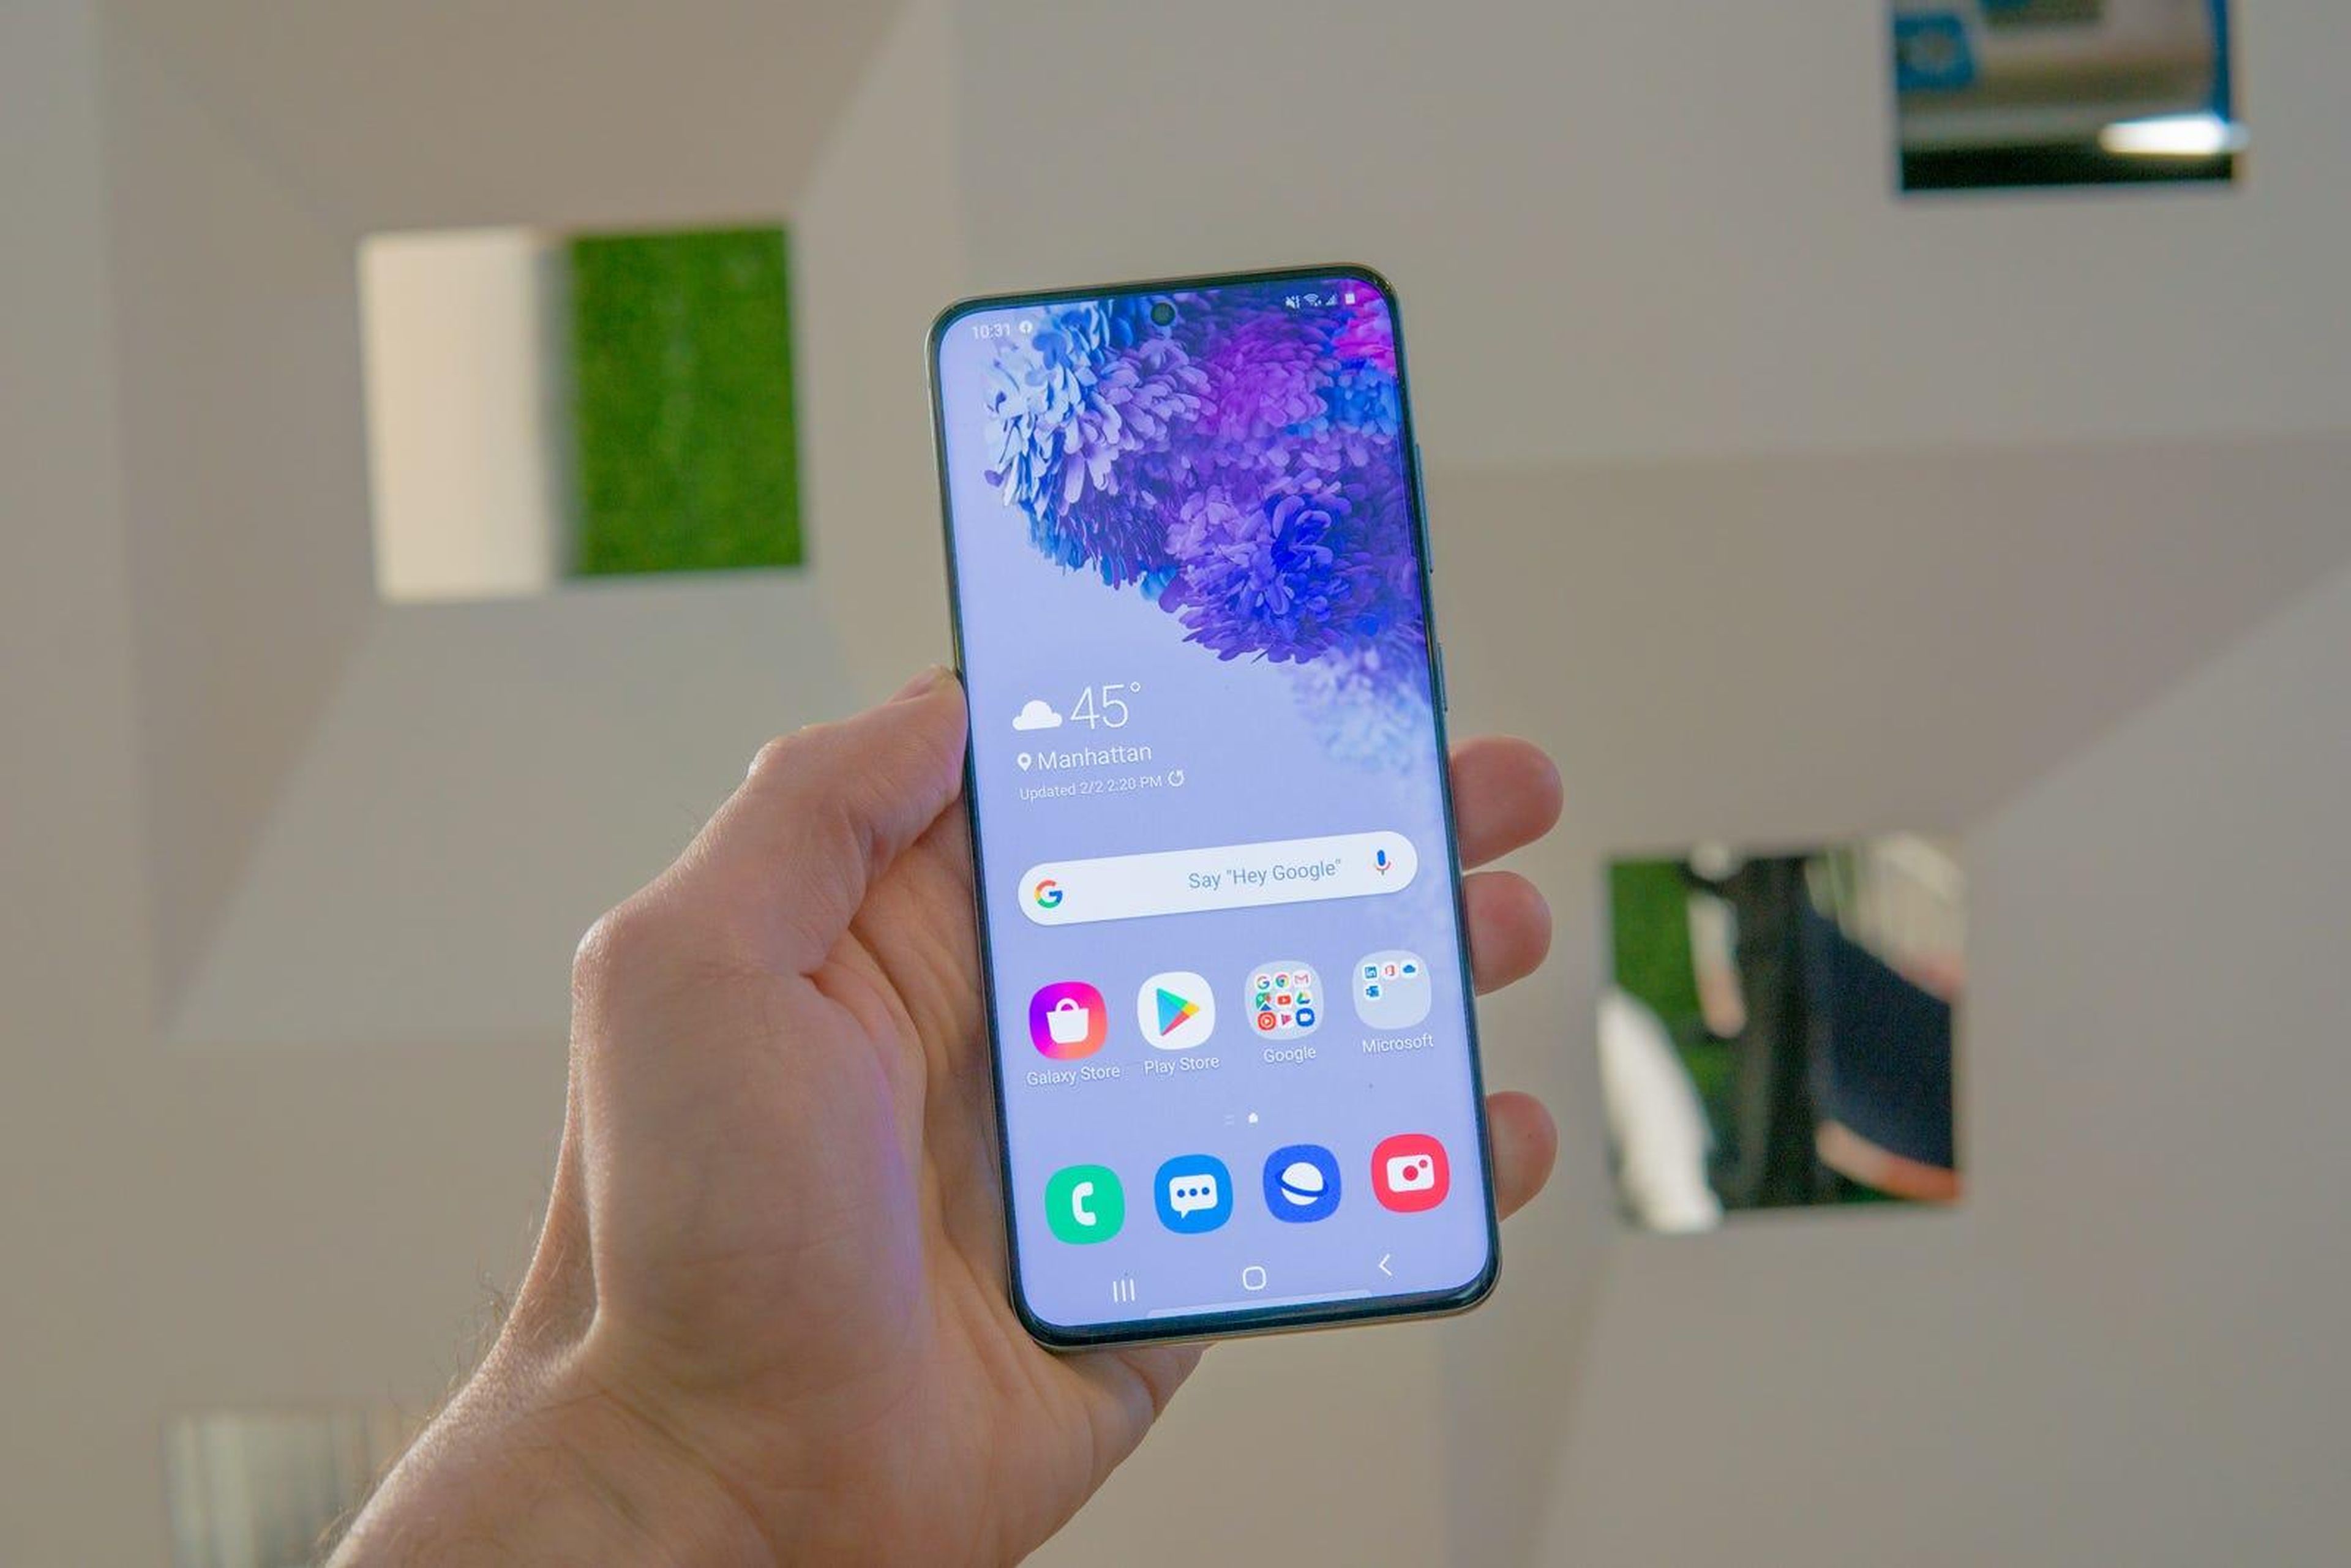 Overall, the experience of using the Galaxy S10 probably isn't all that different than the Galaxy S20.